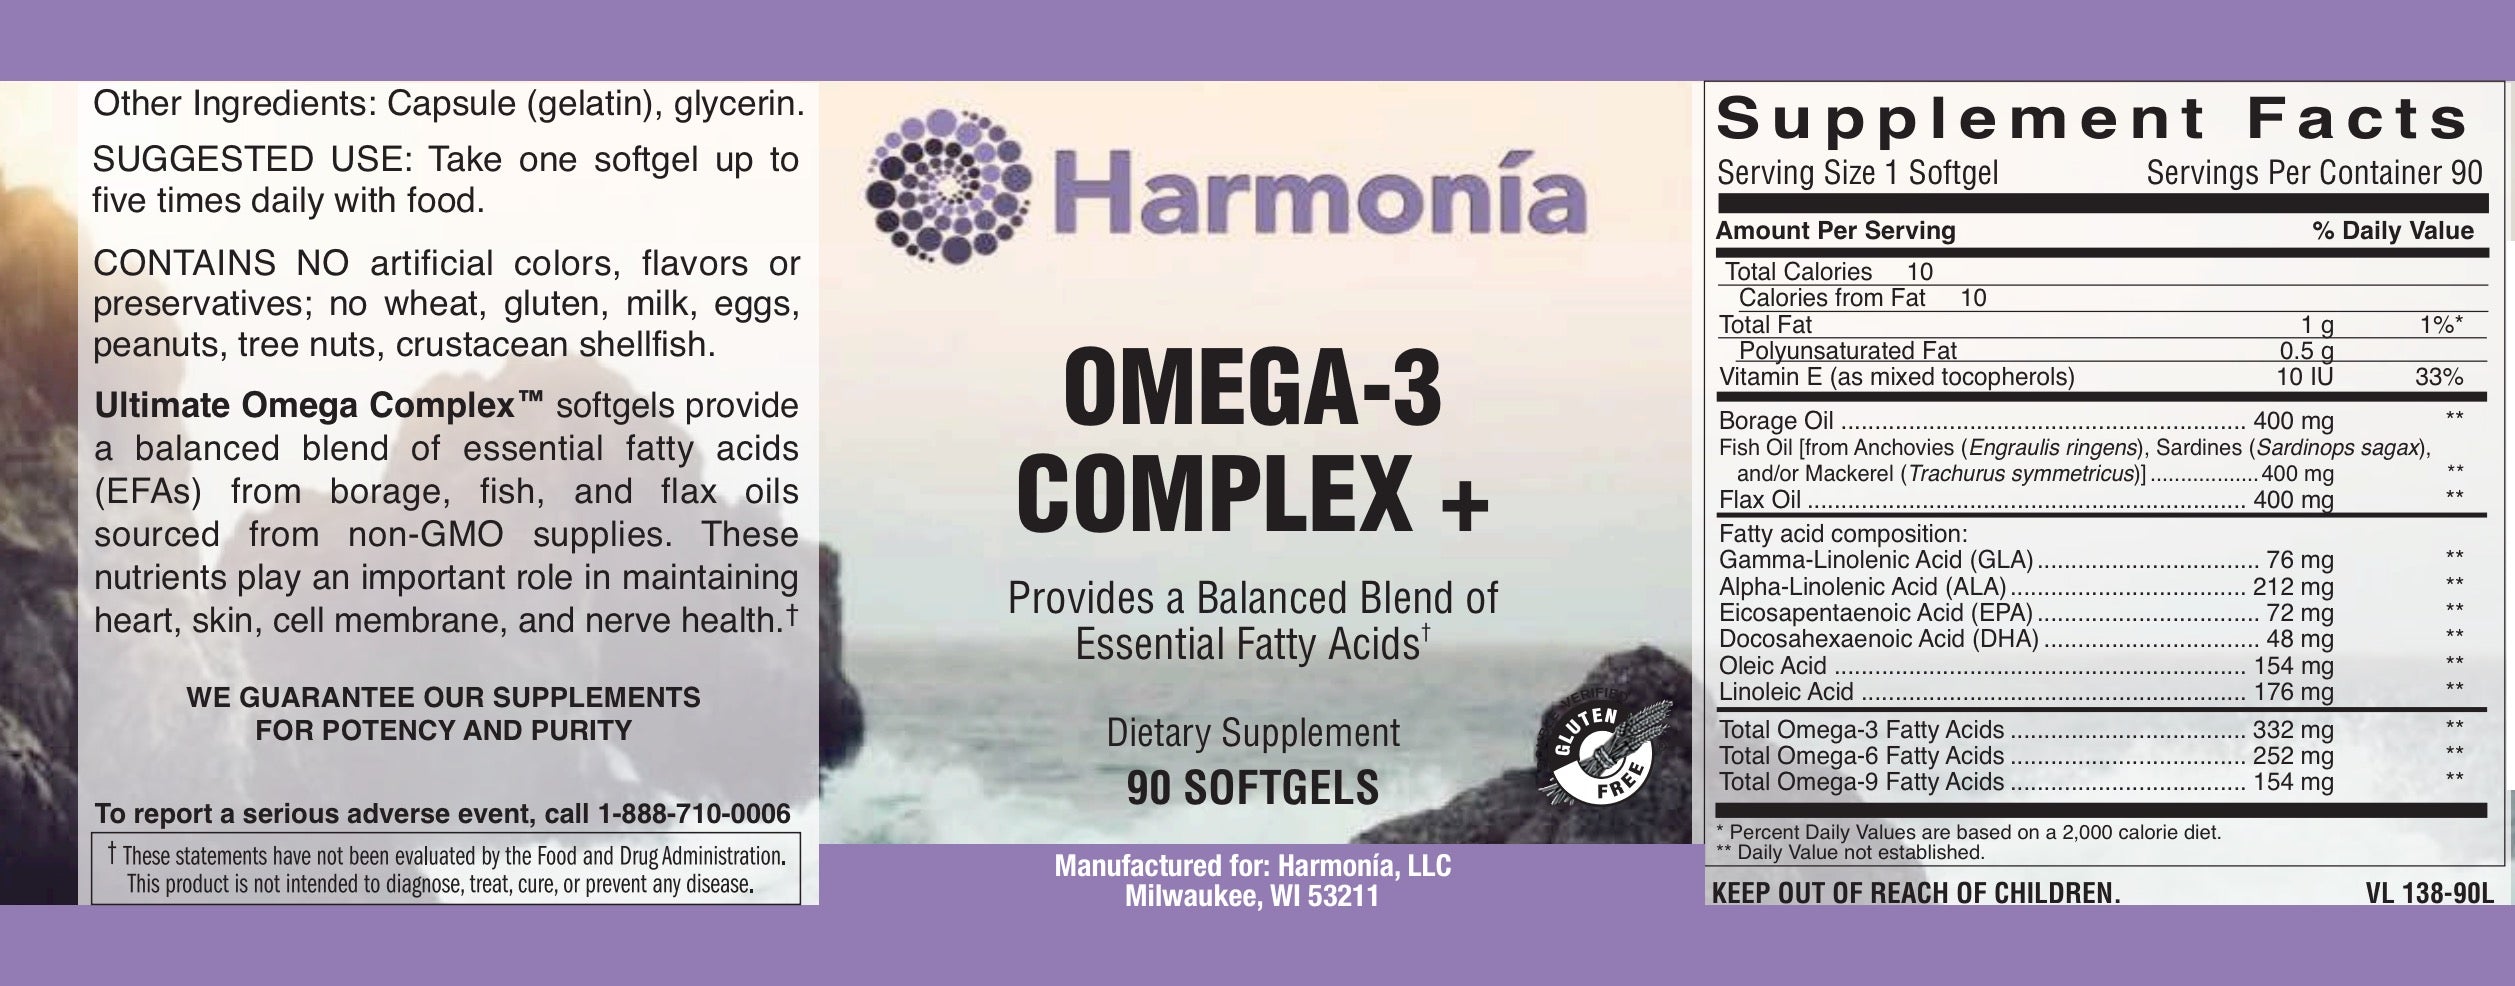 Omega-3 Complex +, with Omega 3, 6, and 9 and Non-GMO Flax Oil